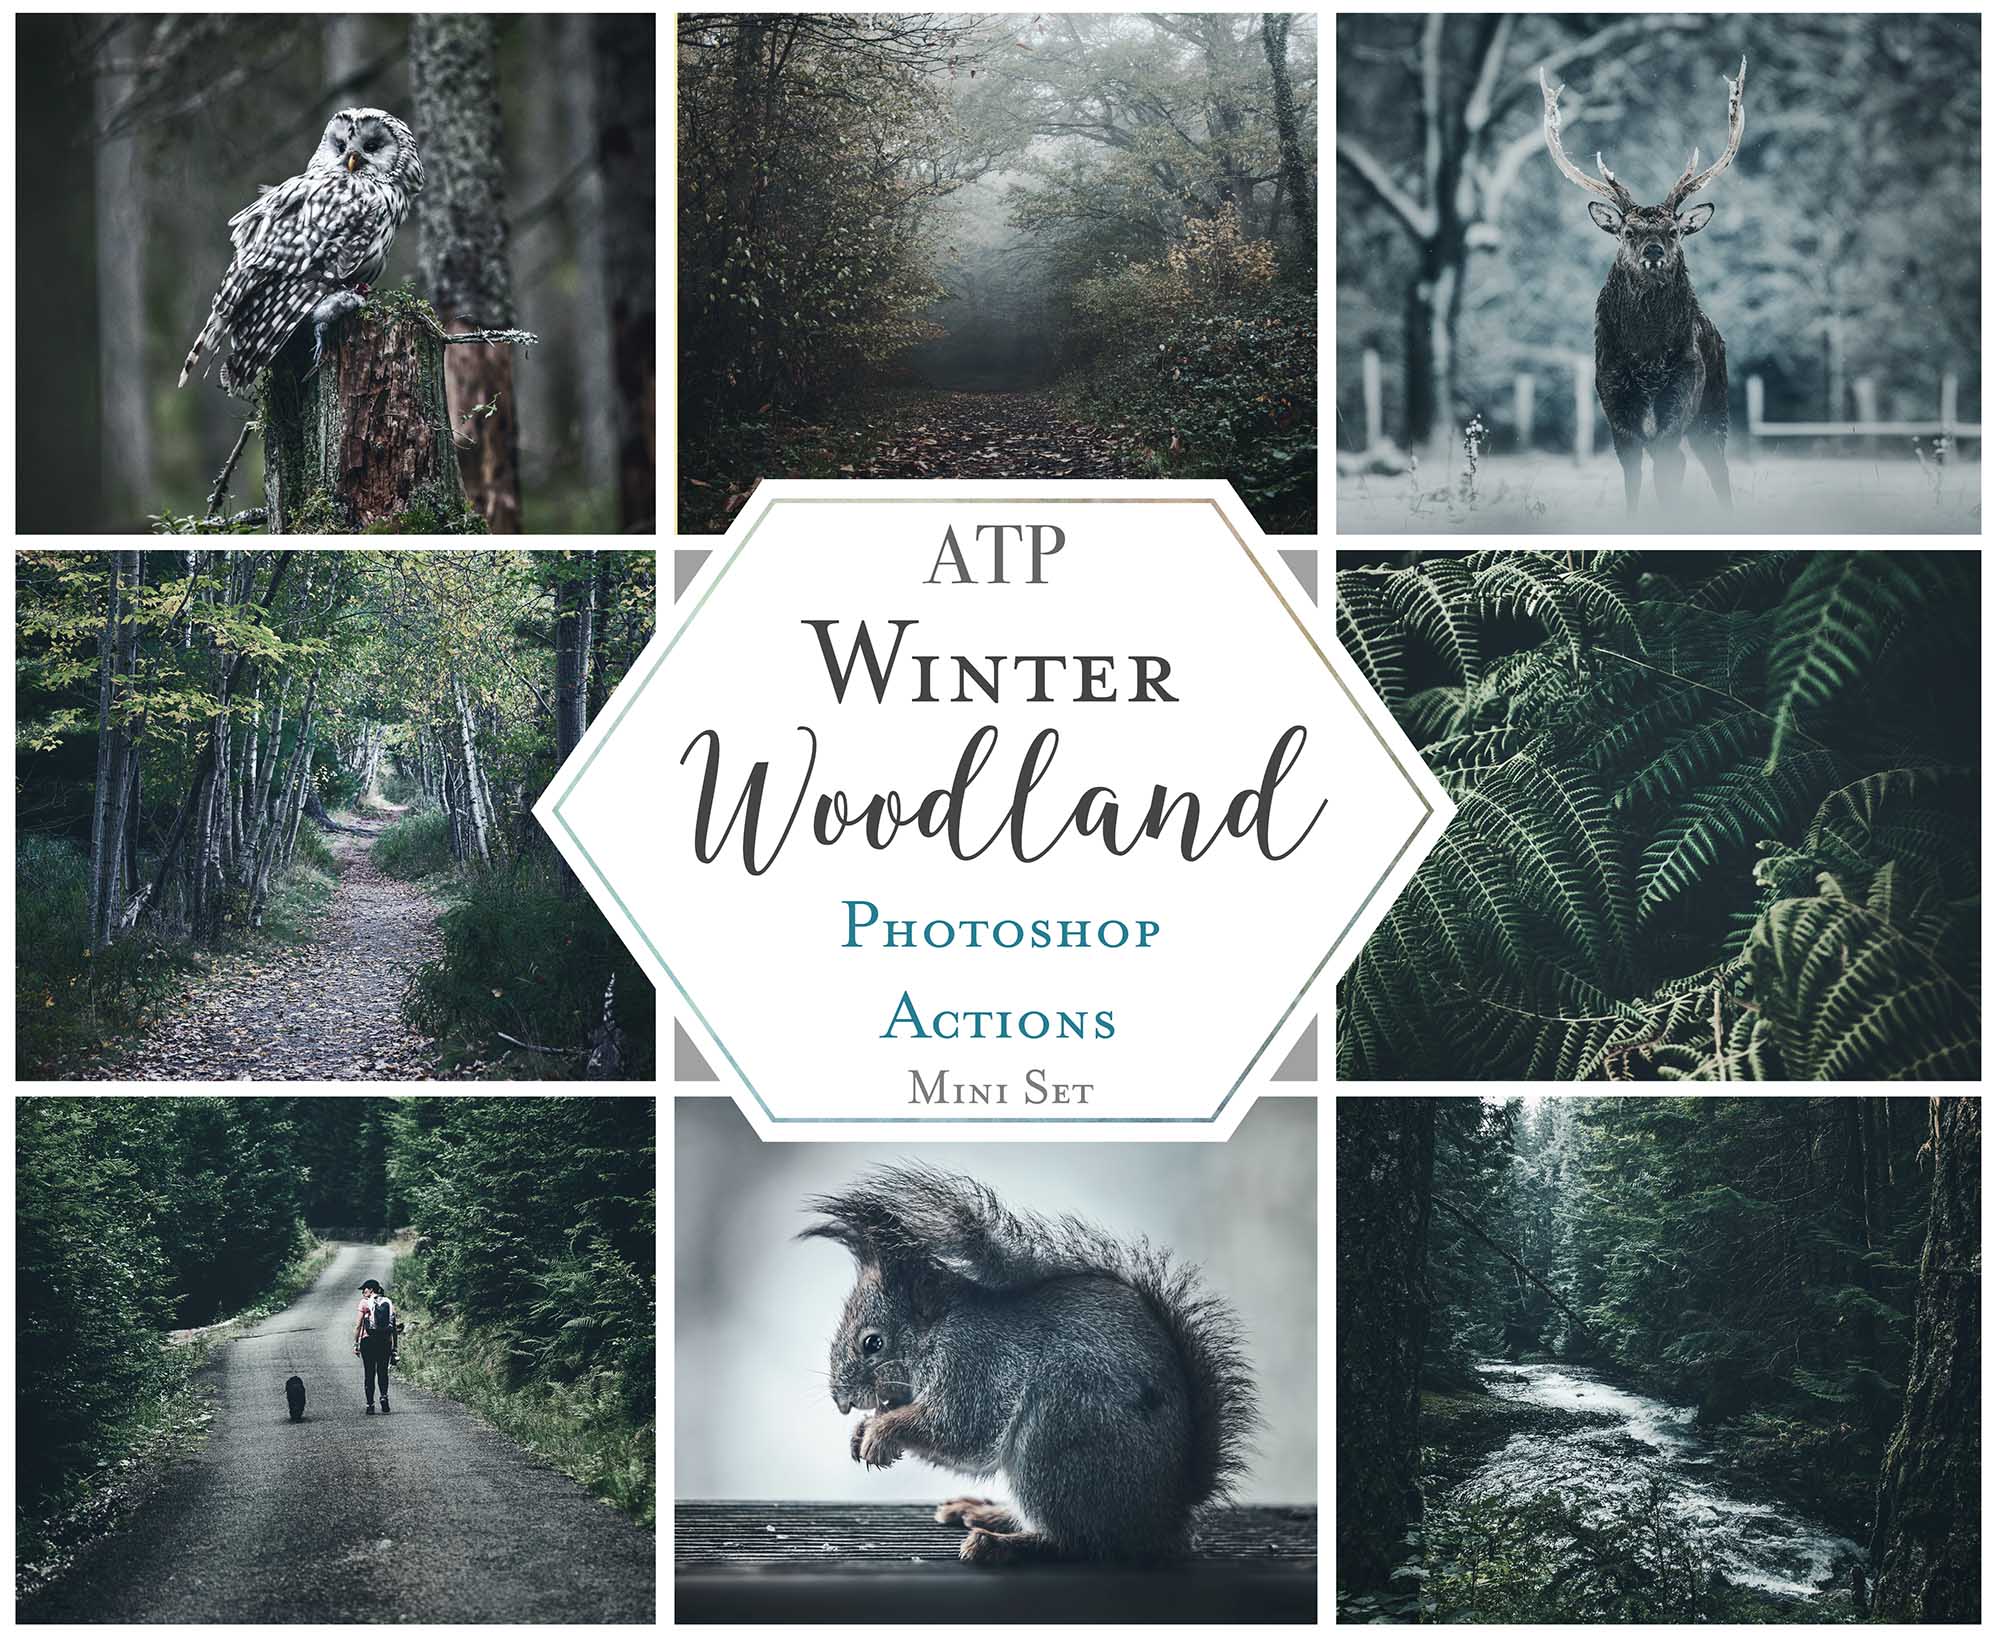 Photoshop Actions for Photography Edits. PS atn files are compatible with all versions of PS CS6. Photoshop Actions for professional photographers, photo edits and Instagram influencers. Warm, Rich, Light, Matte. For Wedding, Newborn, Studio Photography. By ATP Textures